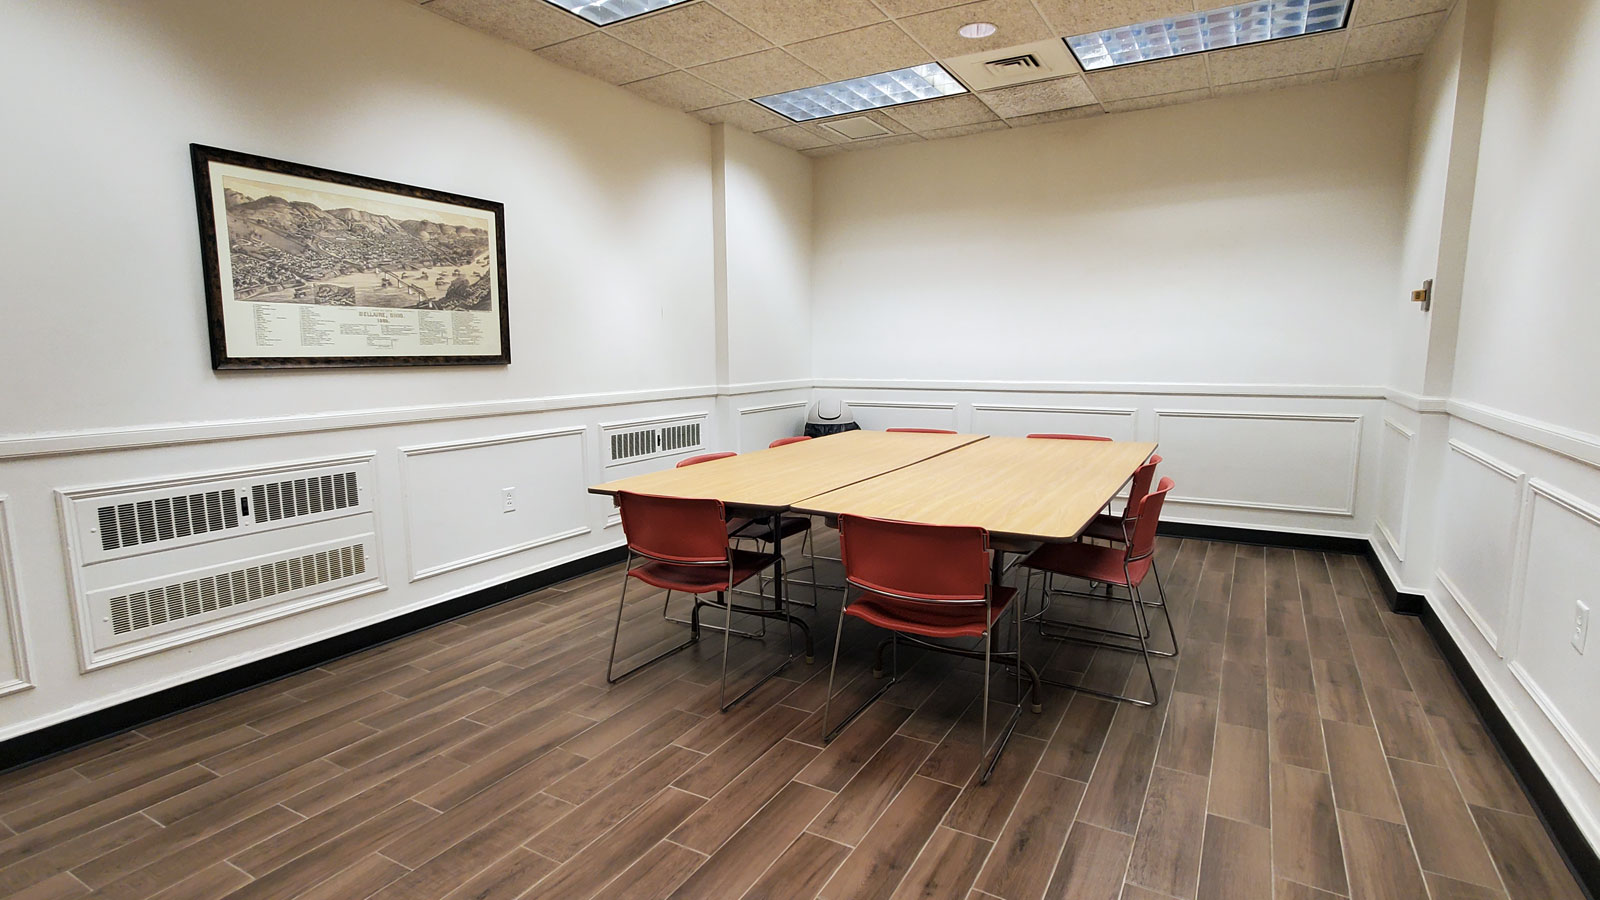 The Table Room at the Bellaire Public Library